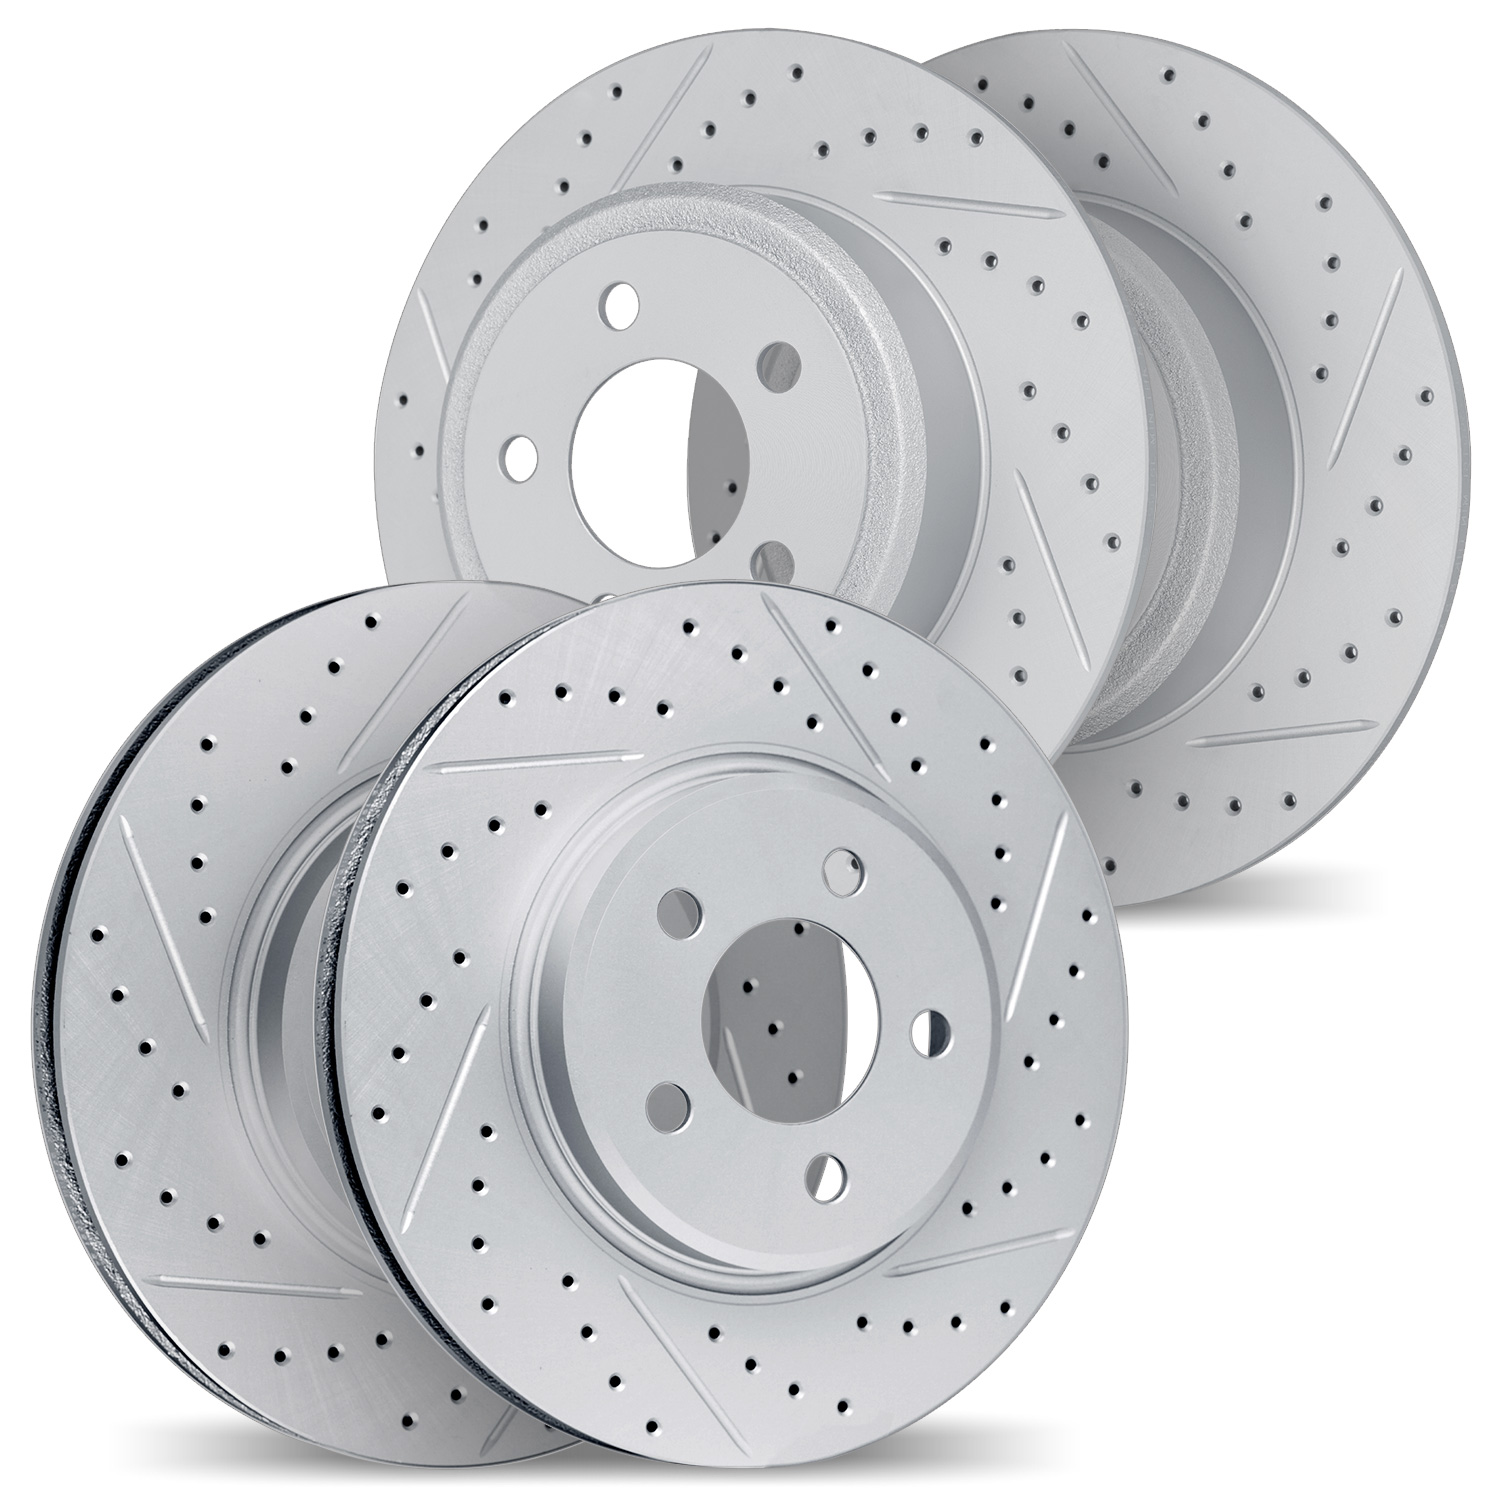 2004-45008 Geoperformance Drilled/Slotted Brake Rotors, 2019-2020 GM, Position: Front and Rear